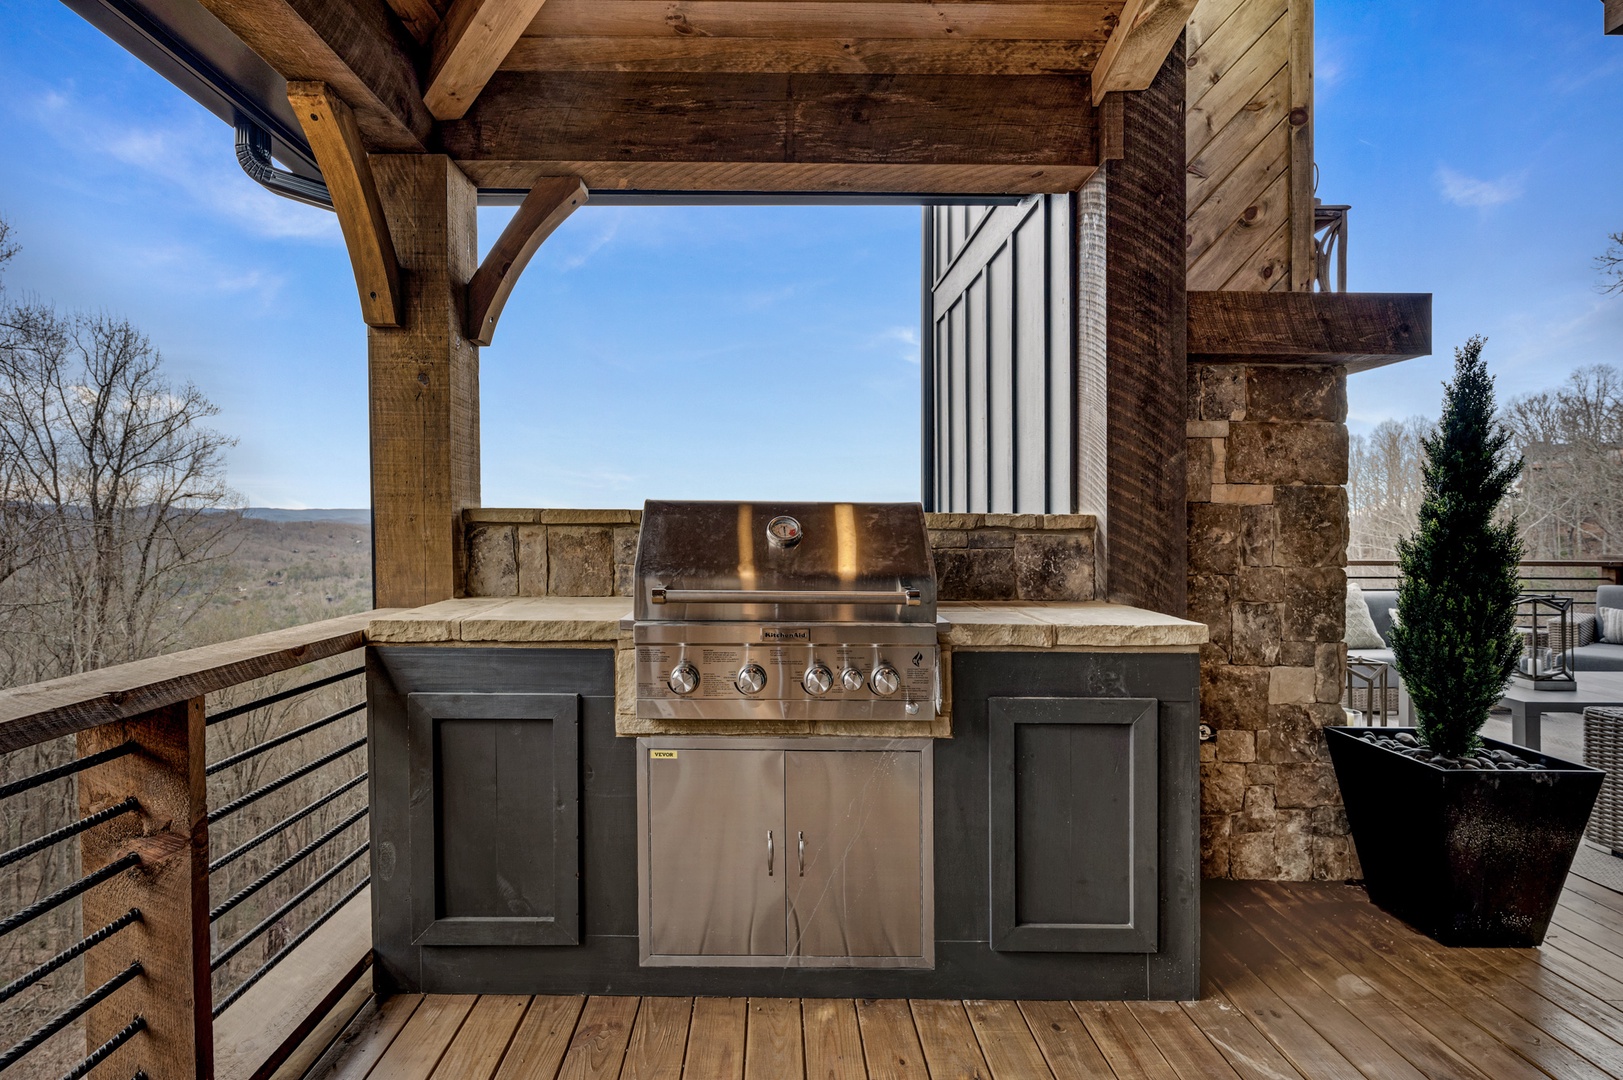 The Sanctuary: Entry Level Deck Deluxe Outdoor Gas Grill